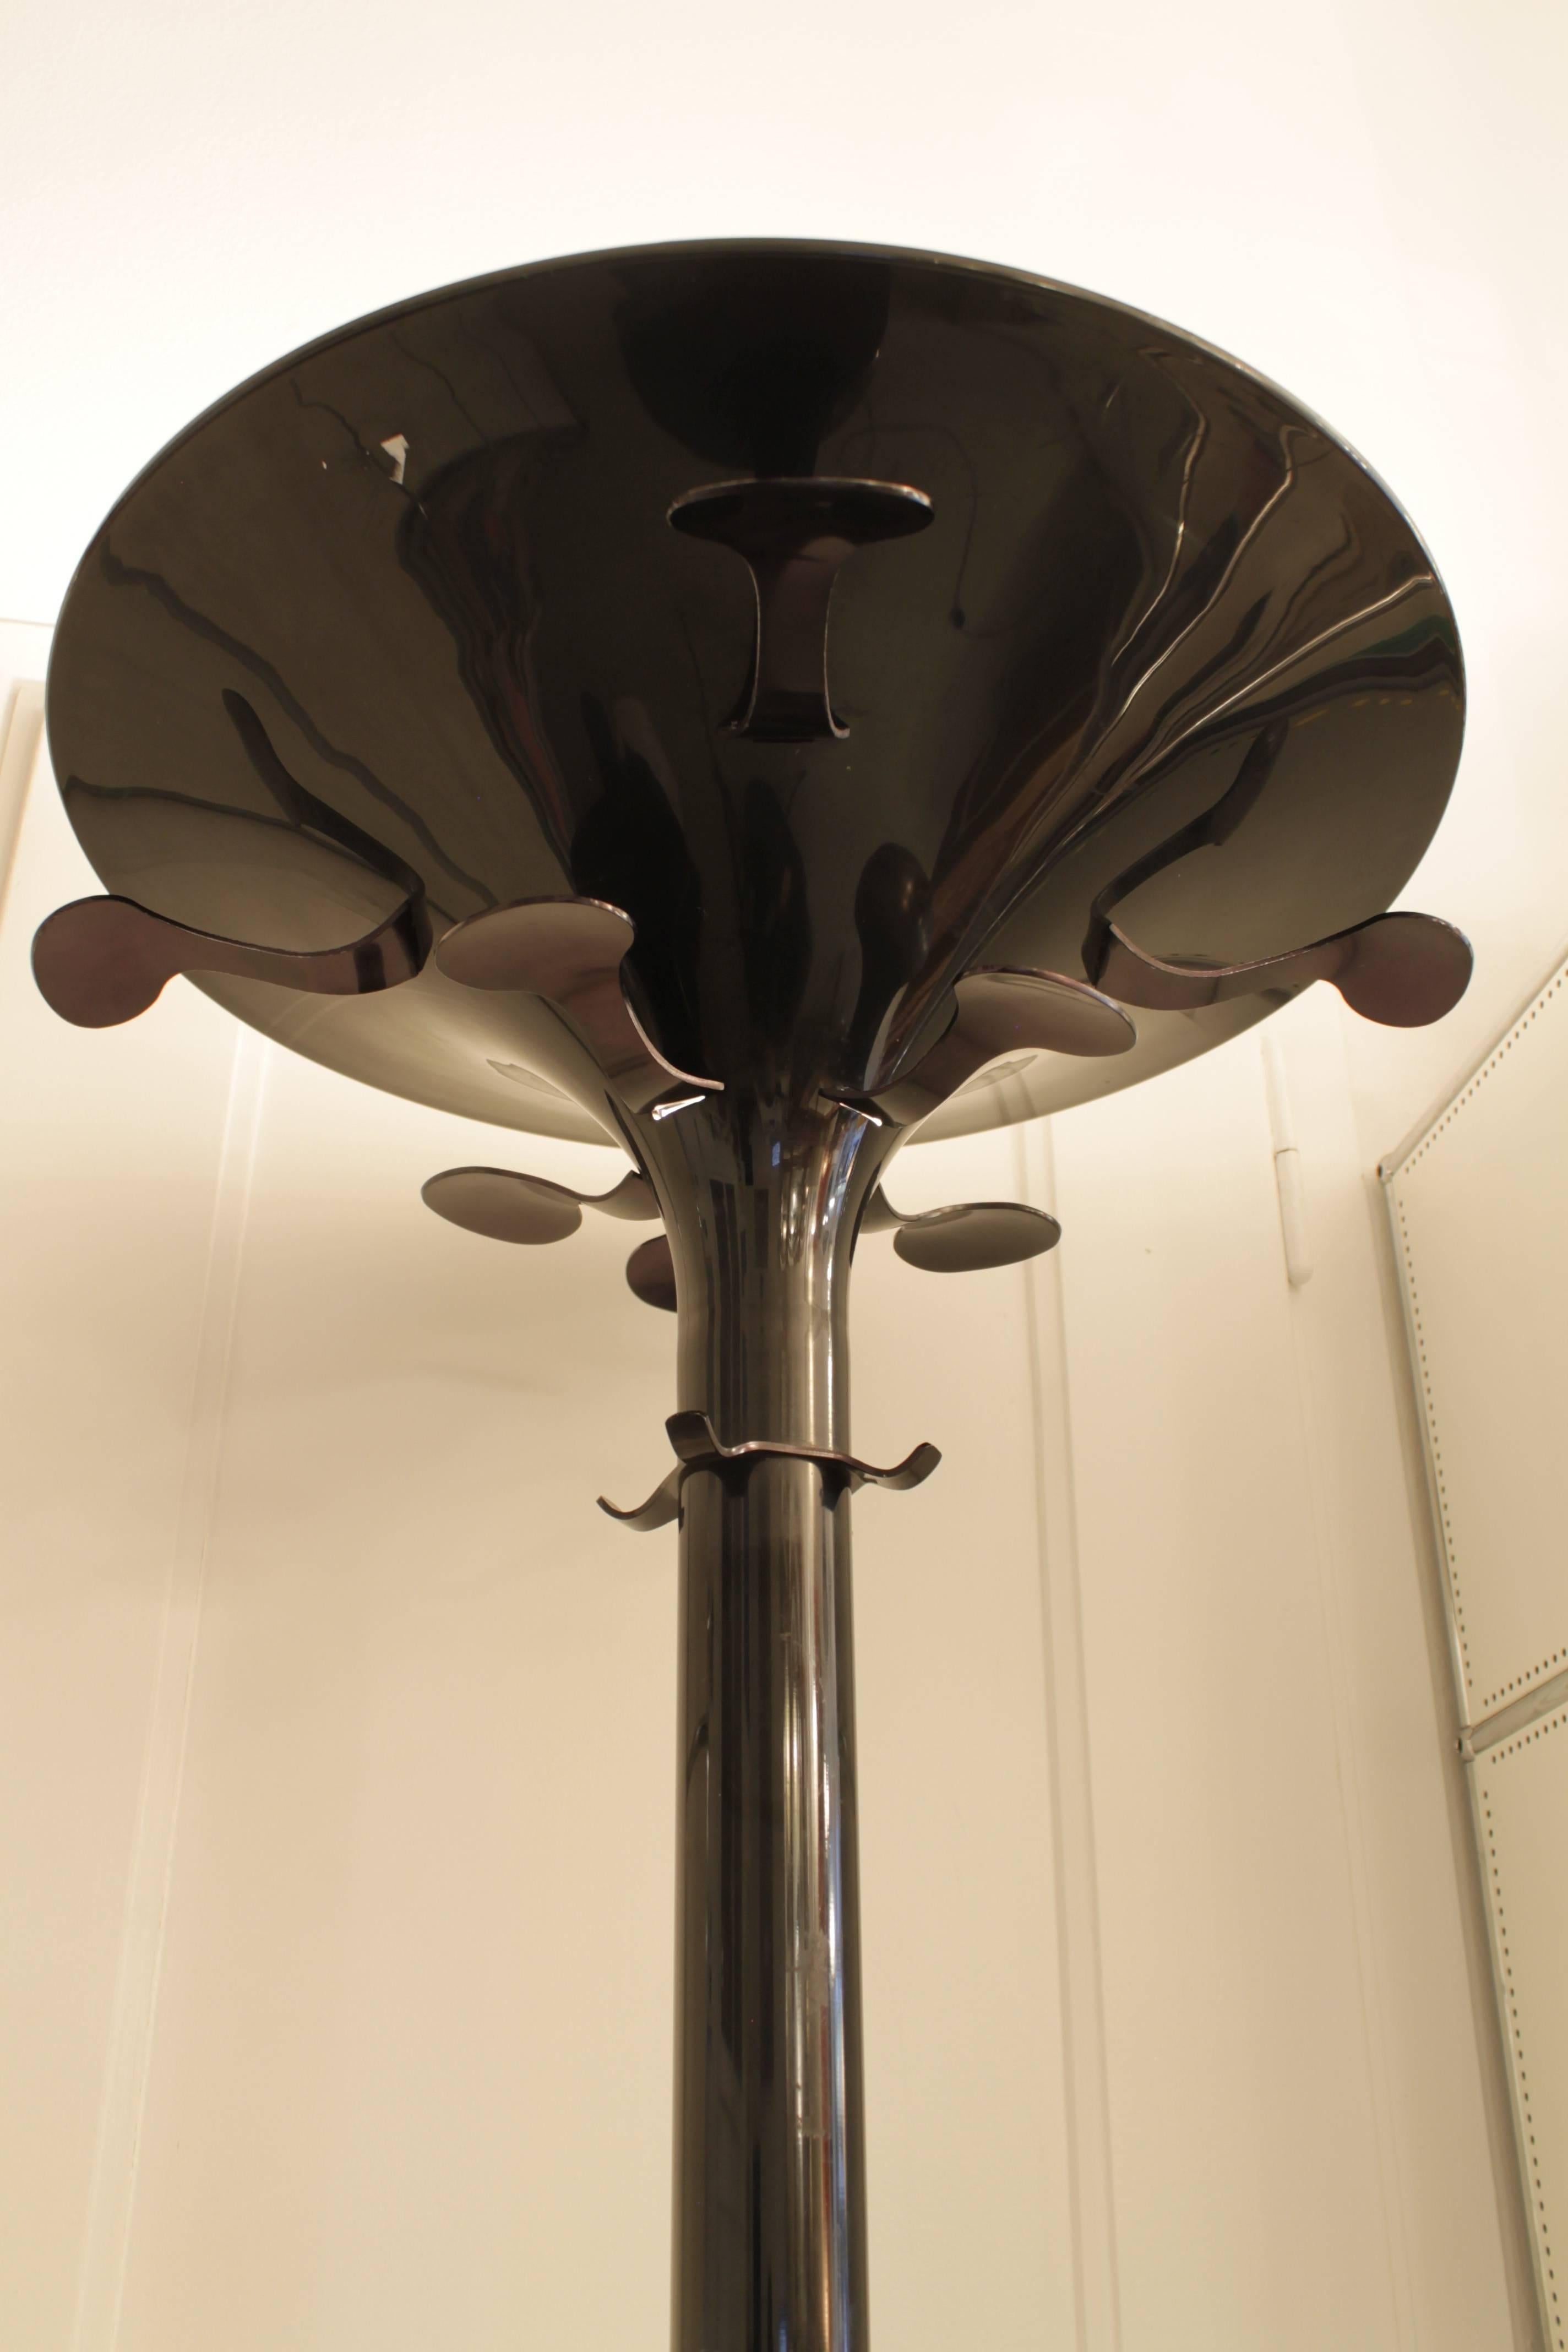 Black vintage luminescent coat rack by Studio BBPR for Kartell, Italy, circa 1970
Very good condition.